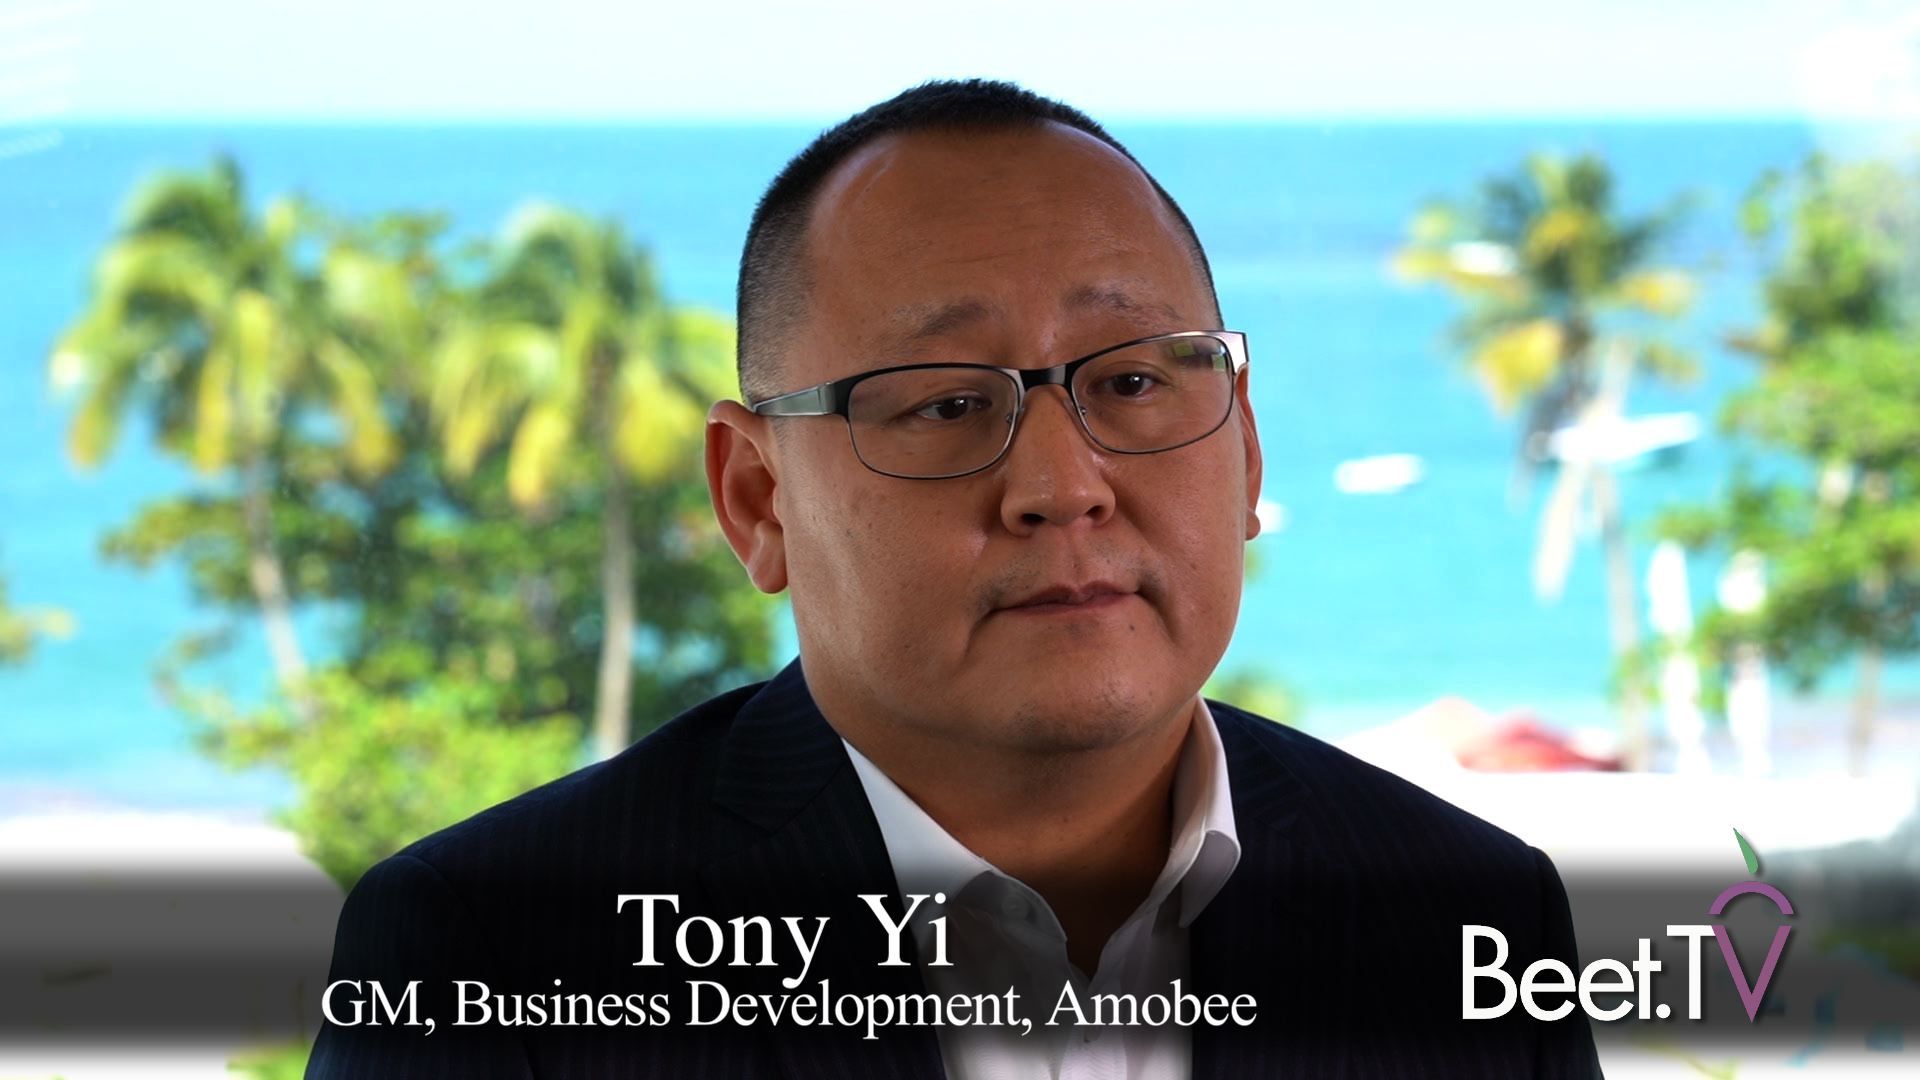 With Videology Assets, Amobee Eyes The Complete Consumer Funnel